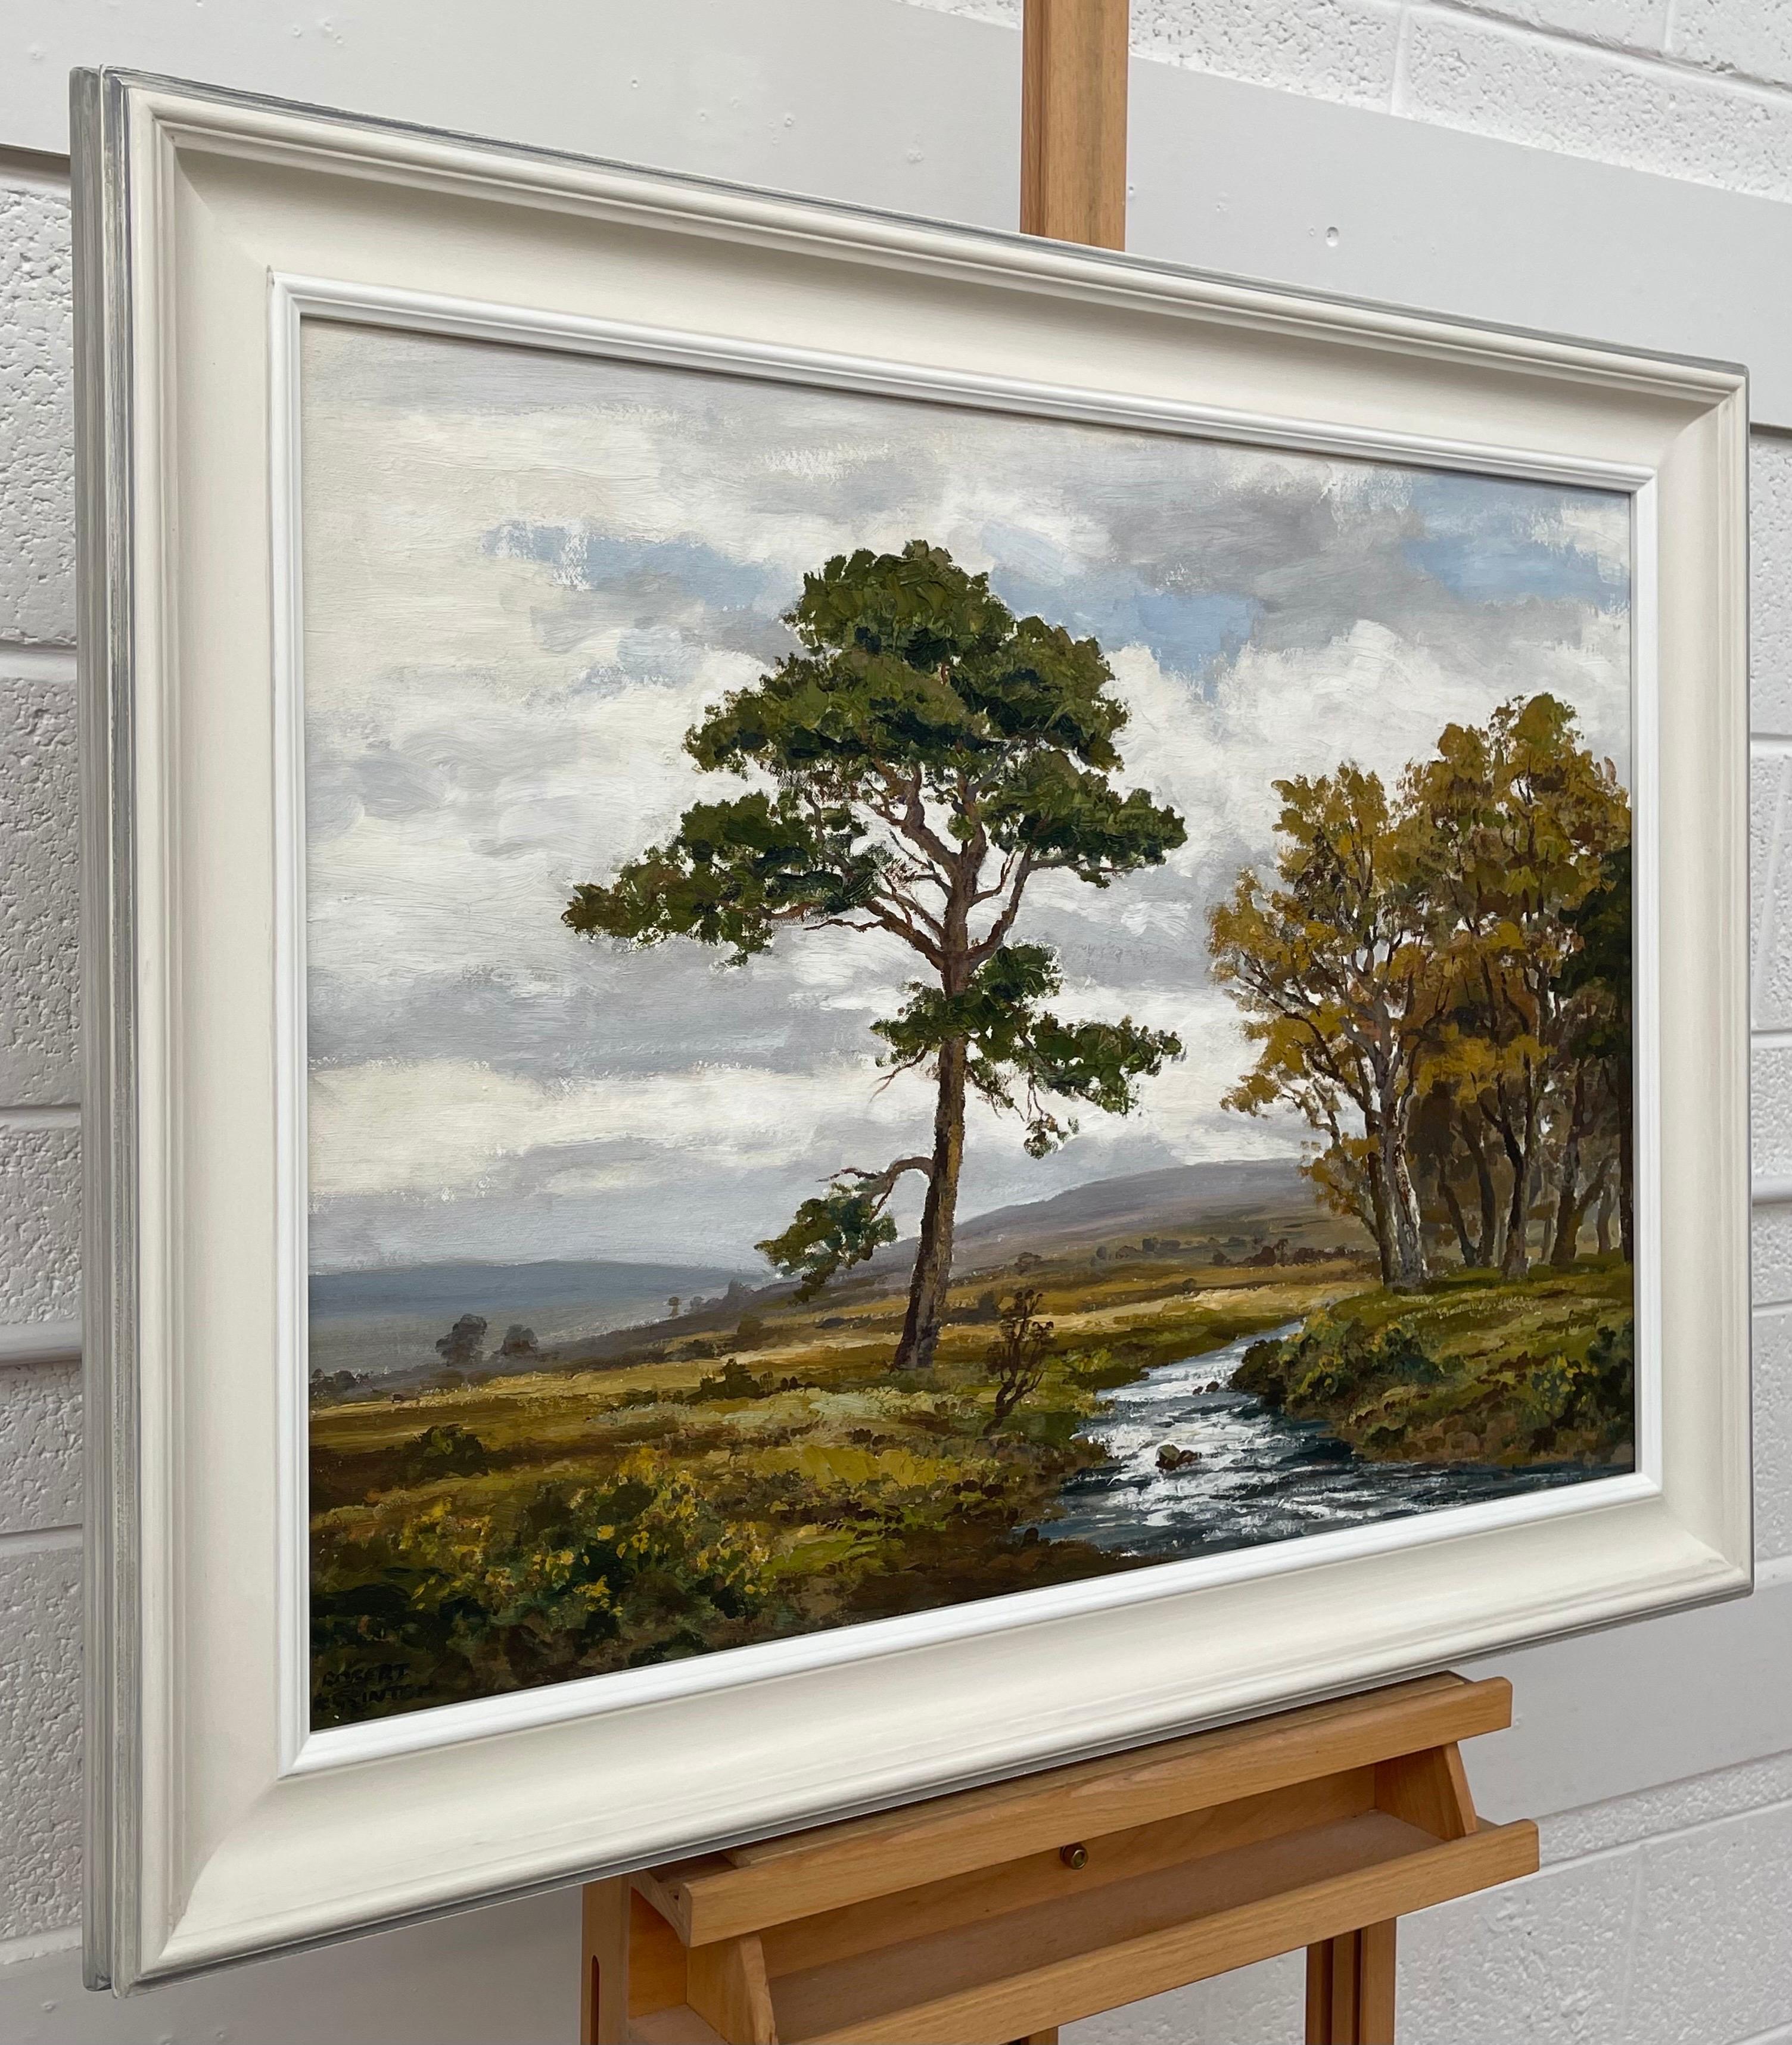 River Landscape of Glenfinnan in the Scottish Highlands by 20th Century Artist - Painting by Robert Eggington